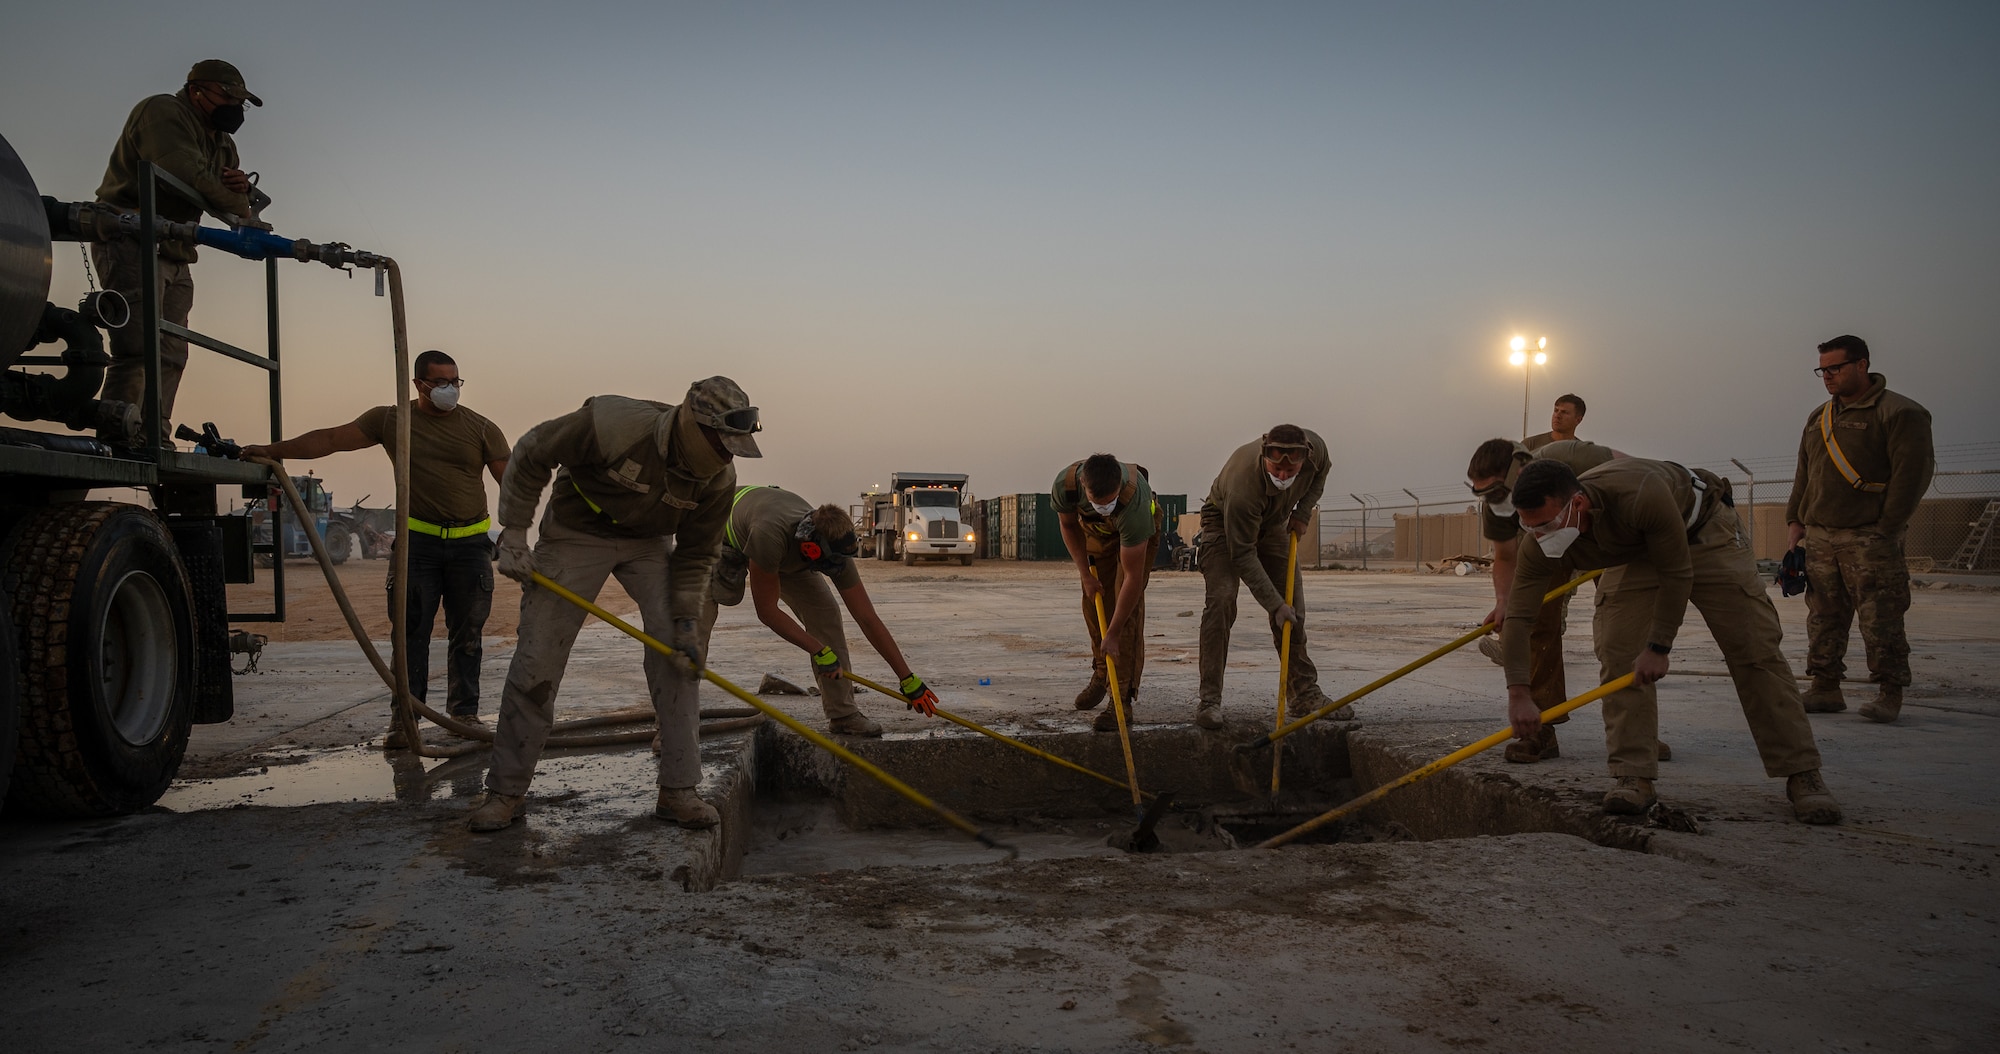 332d Expeditionary Civil Engineer Squadron Airmen mix water and a quick-dry filler to repair runway damage during a rapid airfield damage recovery exercise at an undisclosed location in Southwest Asia, May 12, 2022. RADR exercises test the ability of the 332d ECES to rapidly repair runways and runway support structures to recover and resume airfield operations after it has experienced significant damage. (U.S. Air Force photo by Master Sgt. Christopher Parr)